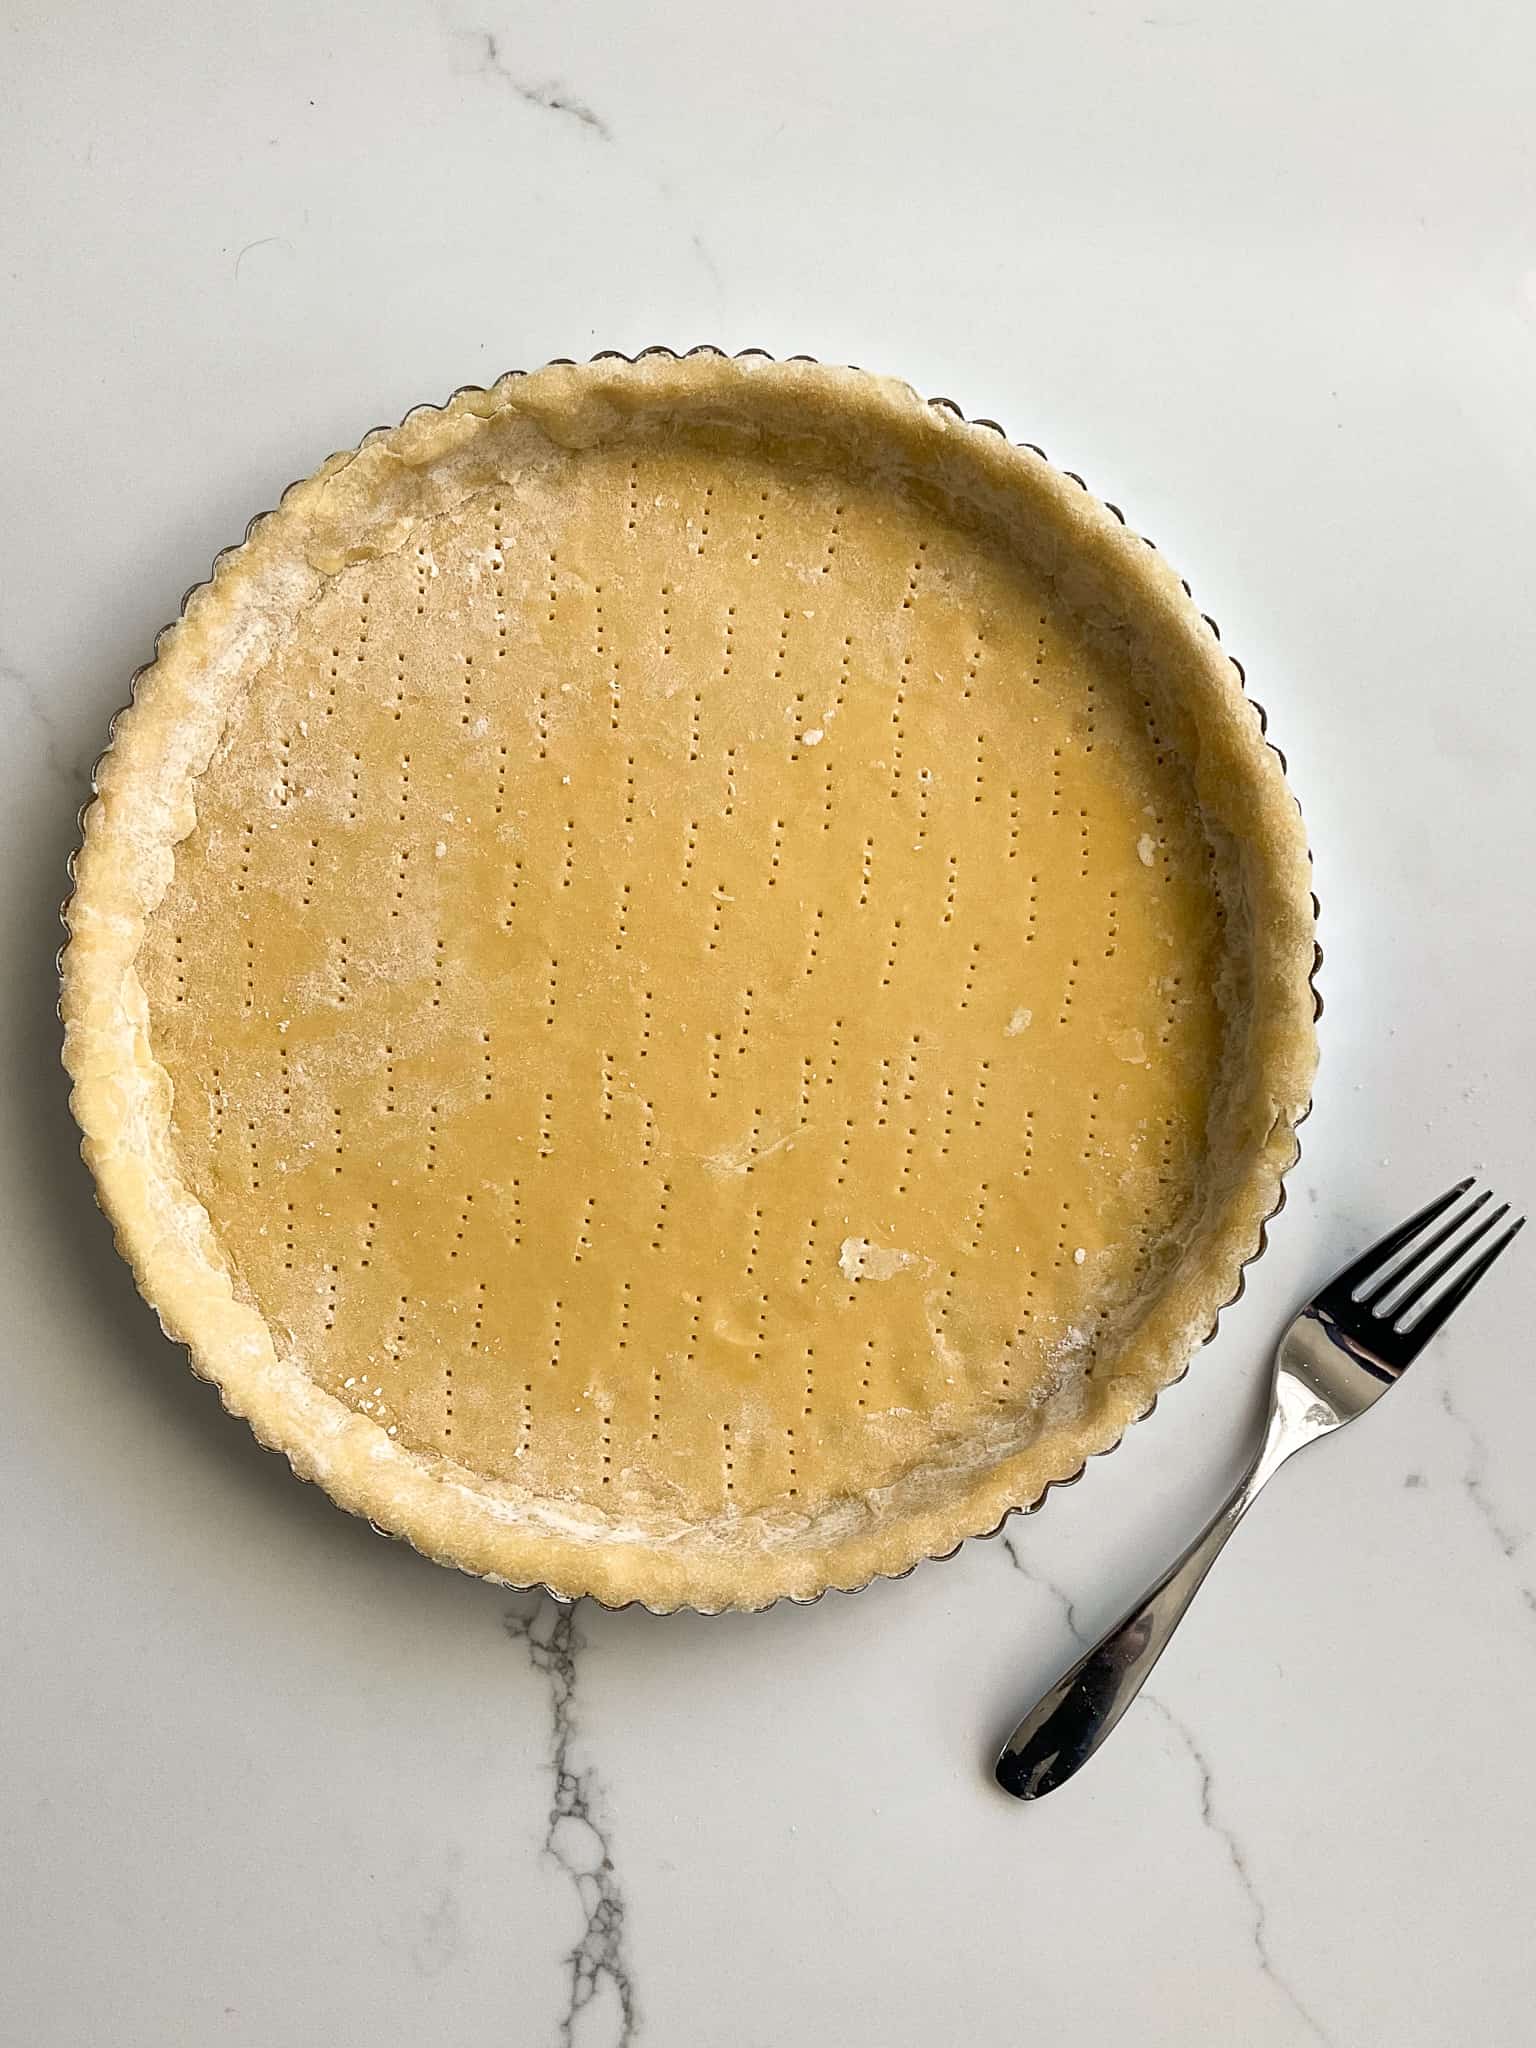 Using a fork, prick the bottom of the crust from side to side.